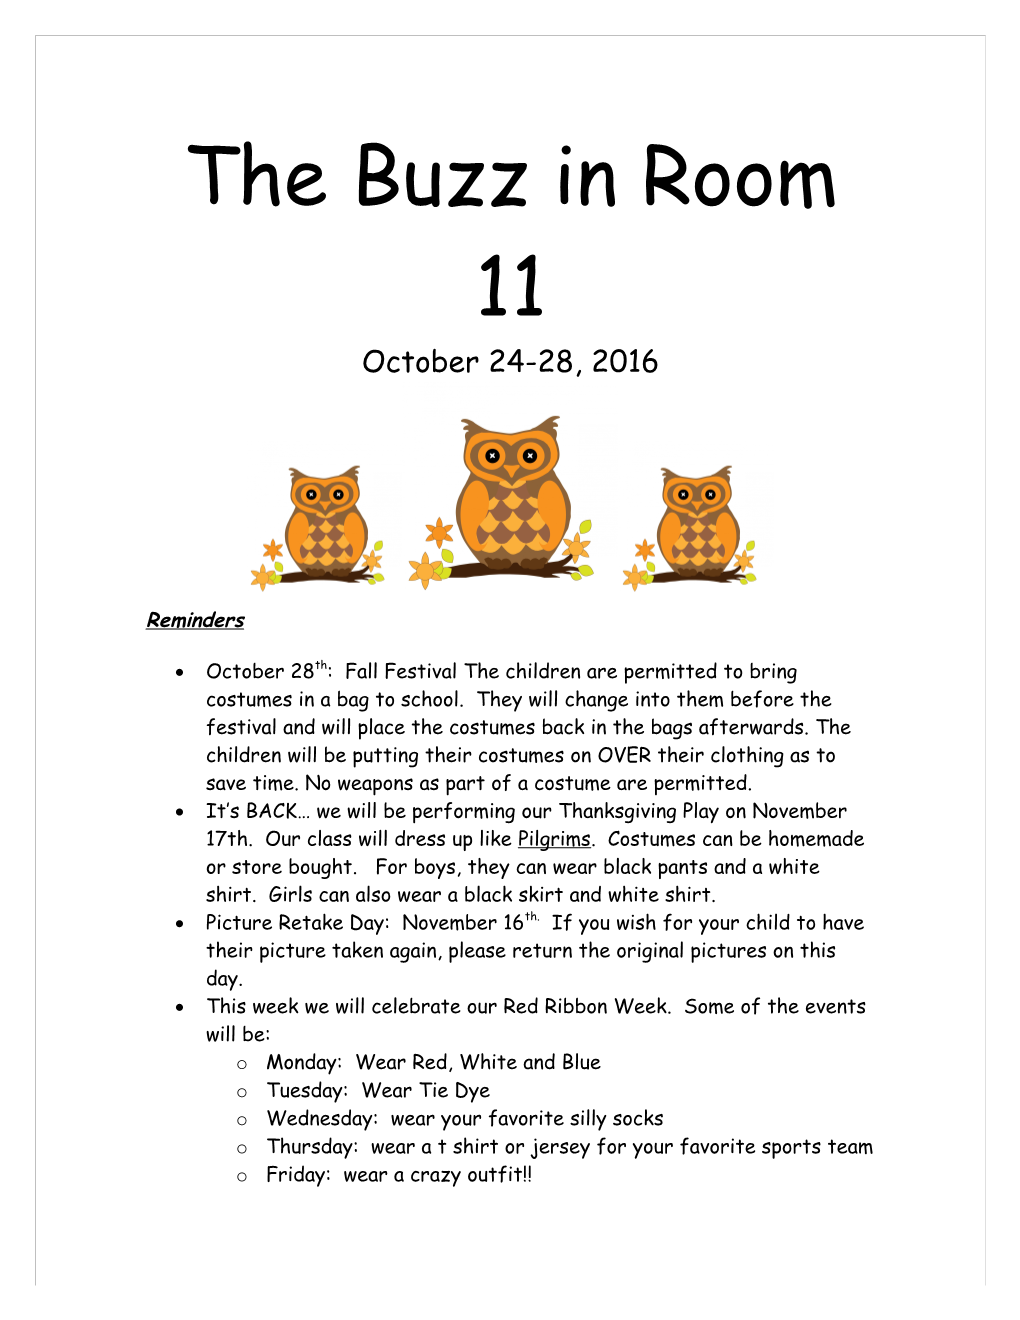 The Buzz in Room 11